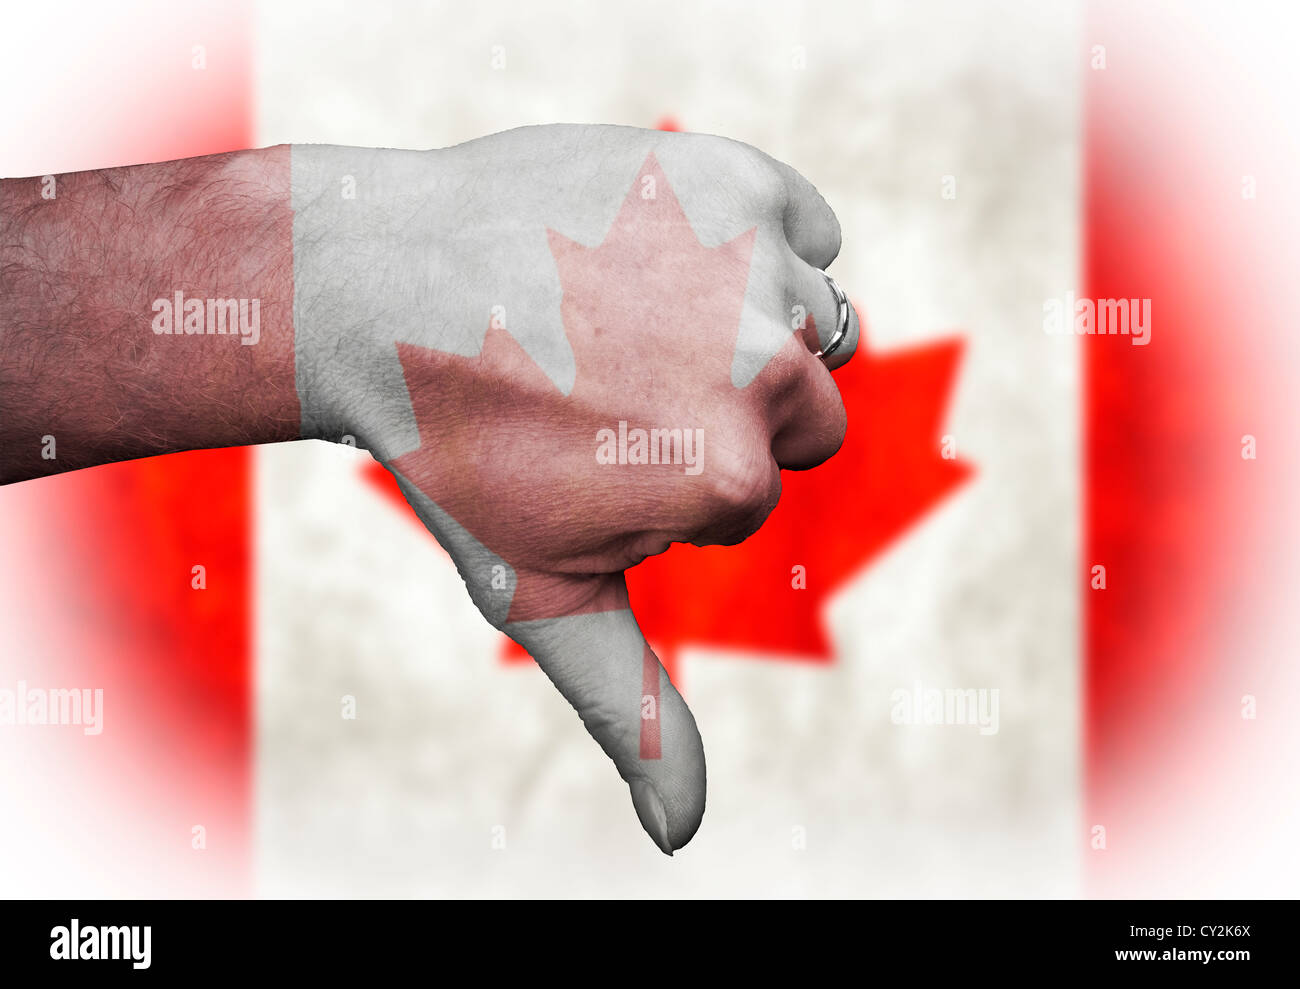 Thumbs down to the Canadians Canada, sporting metaphor in rugby football all national sports team and derogatory slur to people. Stock Photo